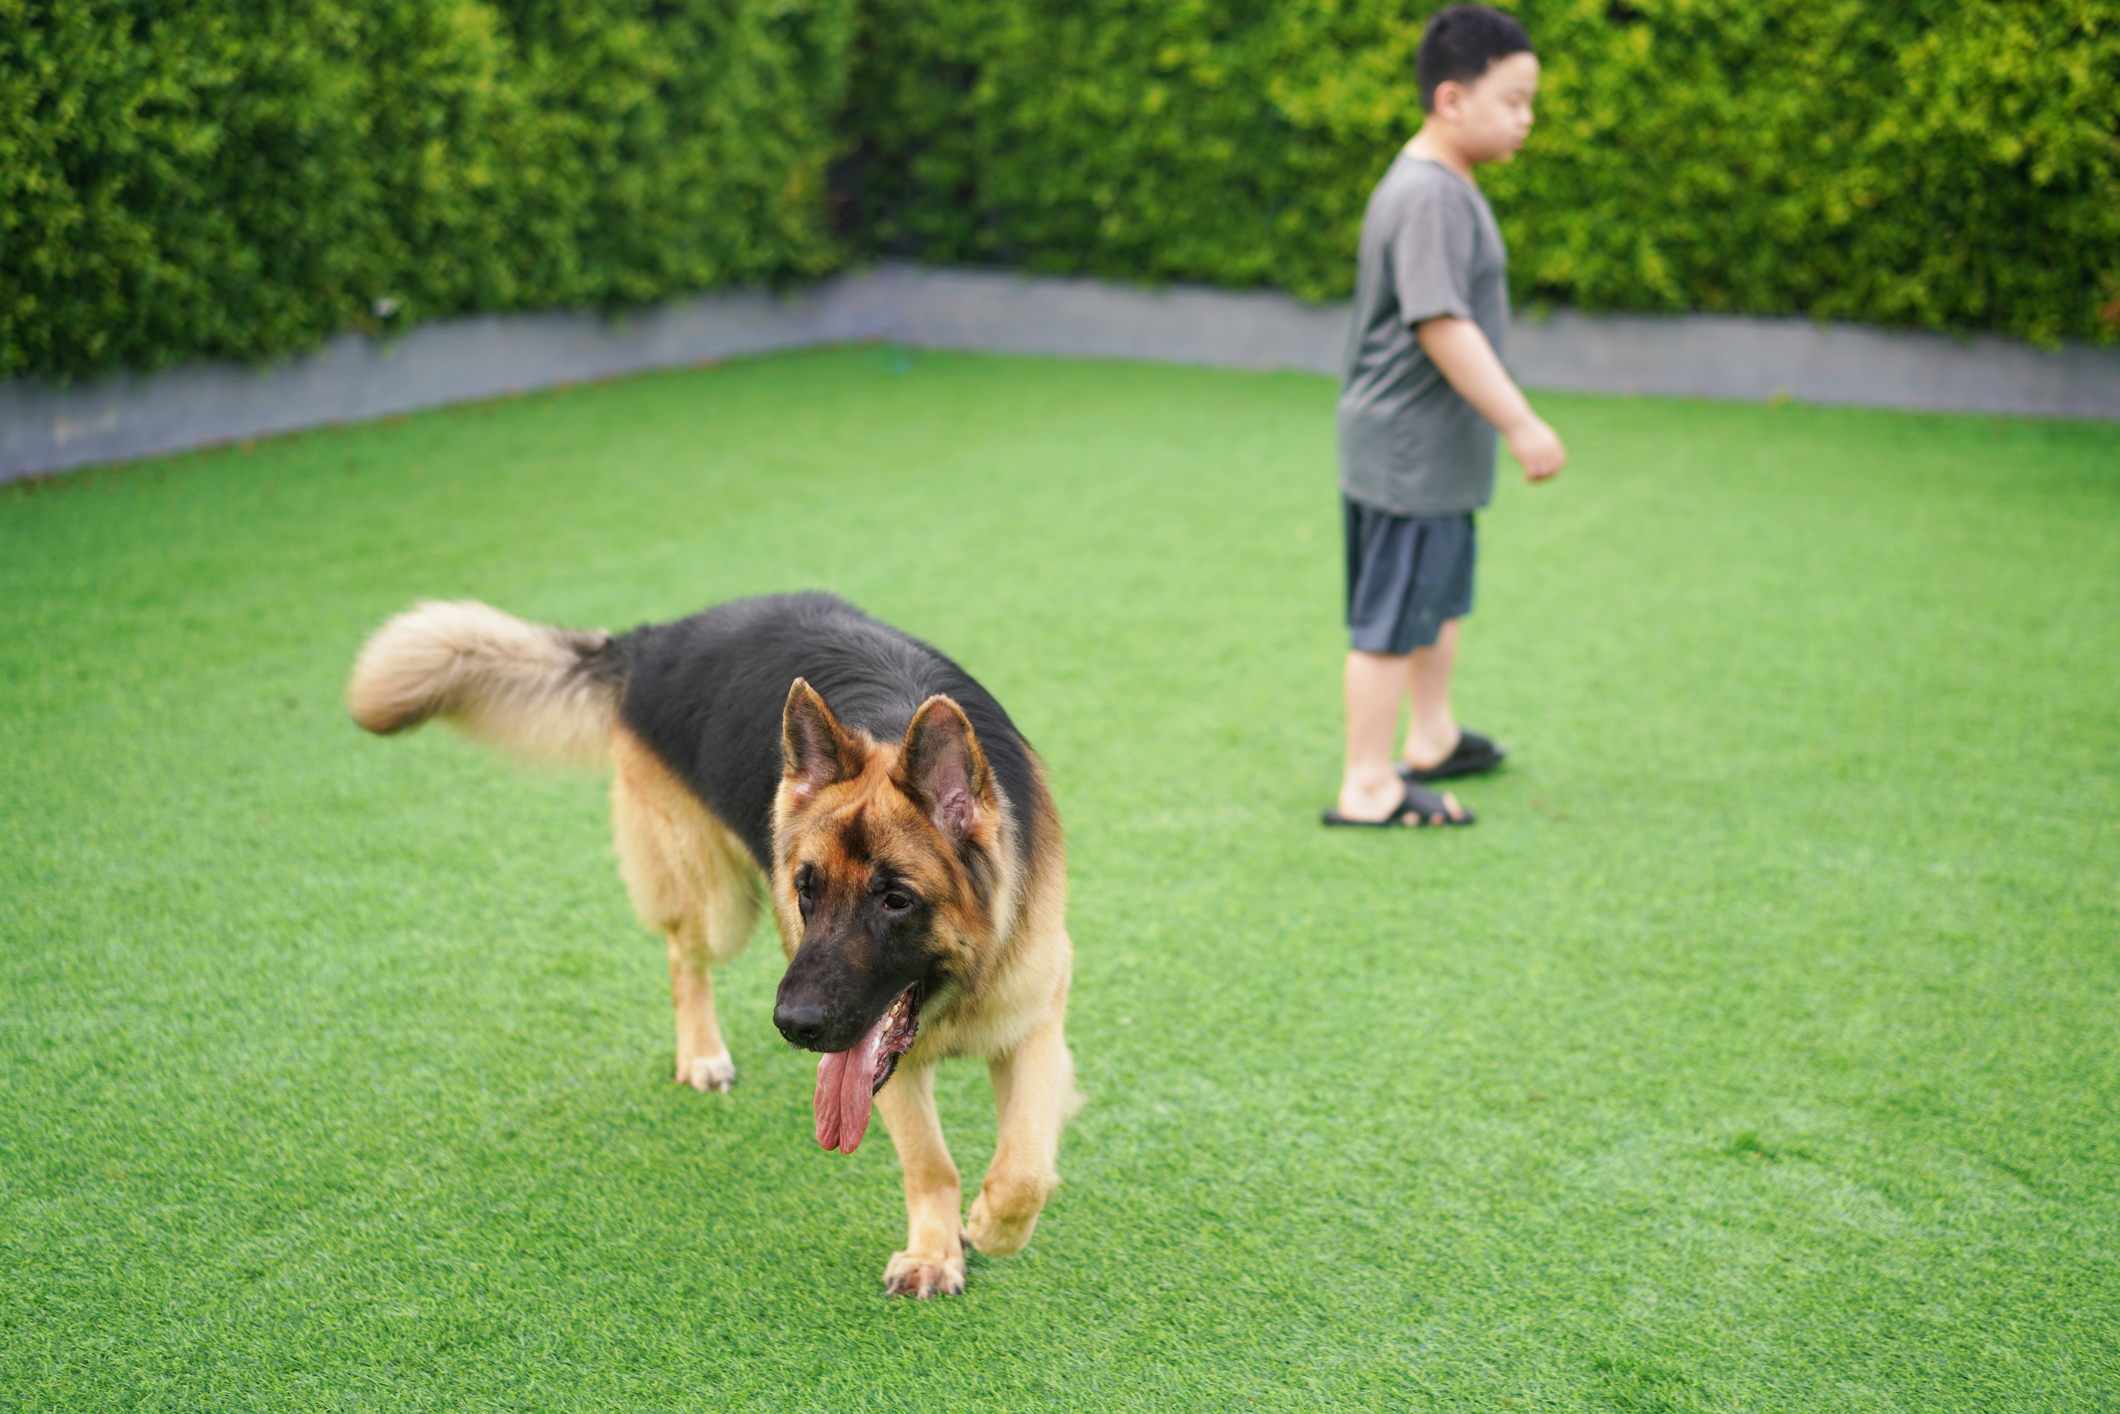 Small dog playing with a ball on artificial turf.